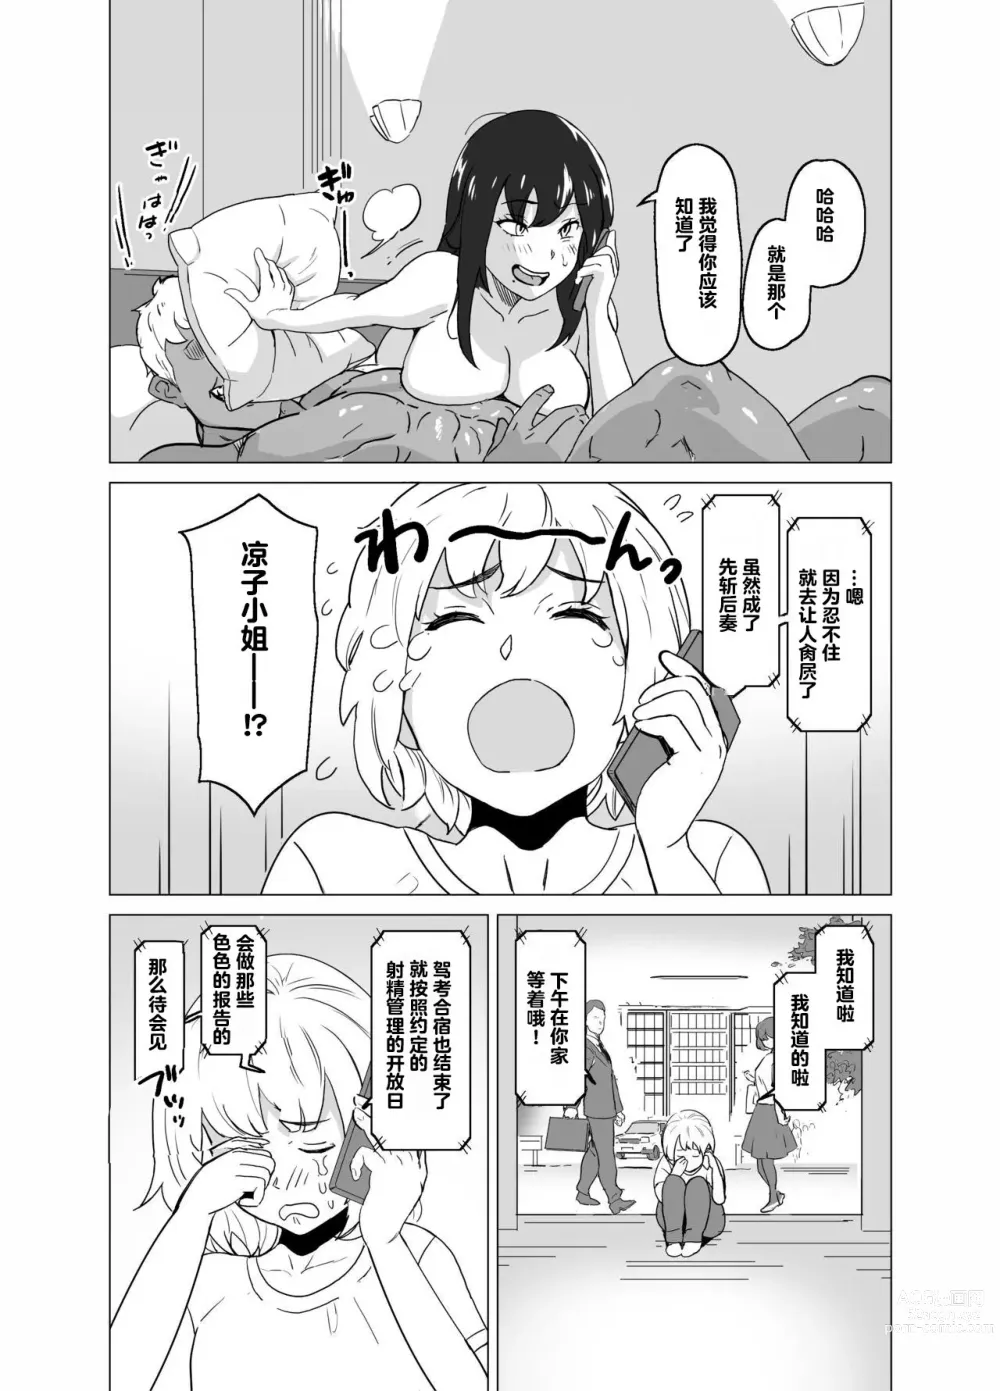 Page 5 of doujinshi older girlfriend who reports cheating while flirting love